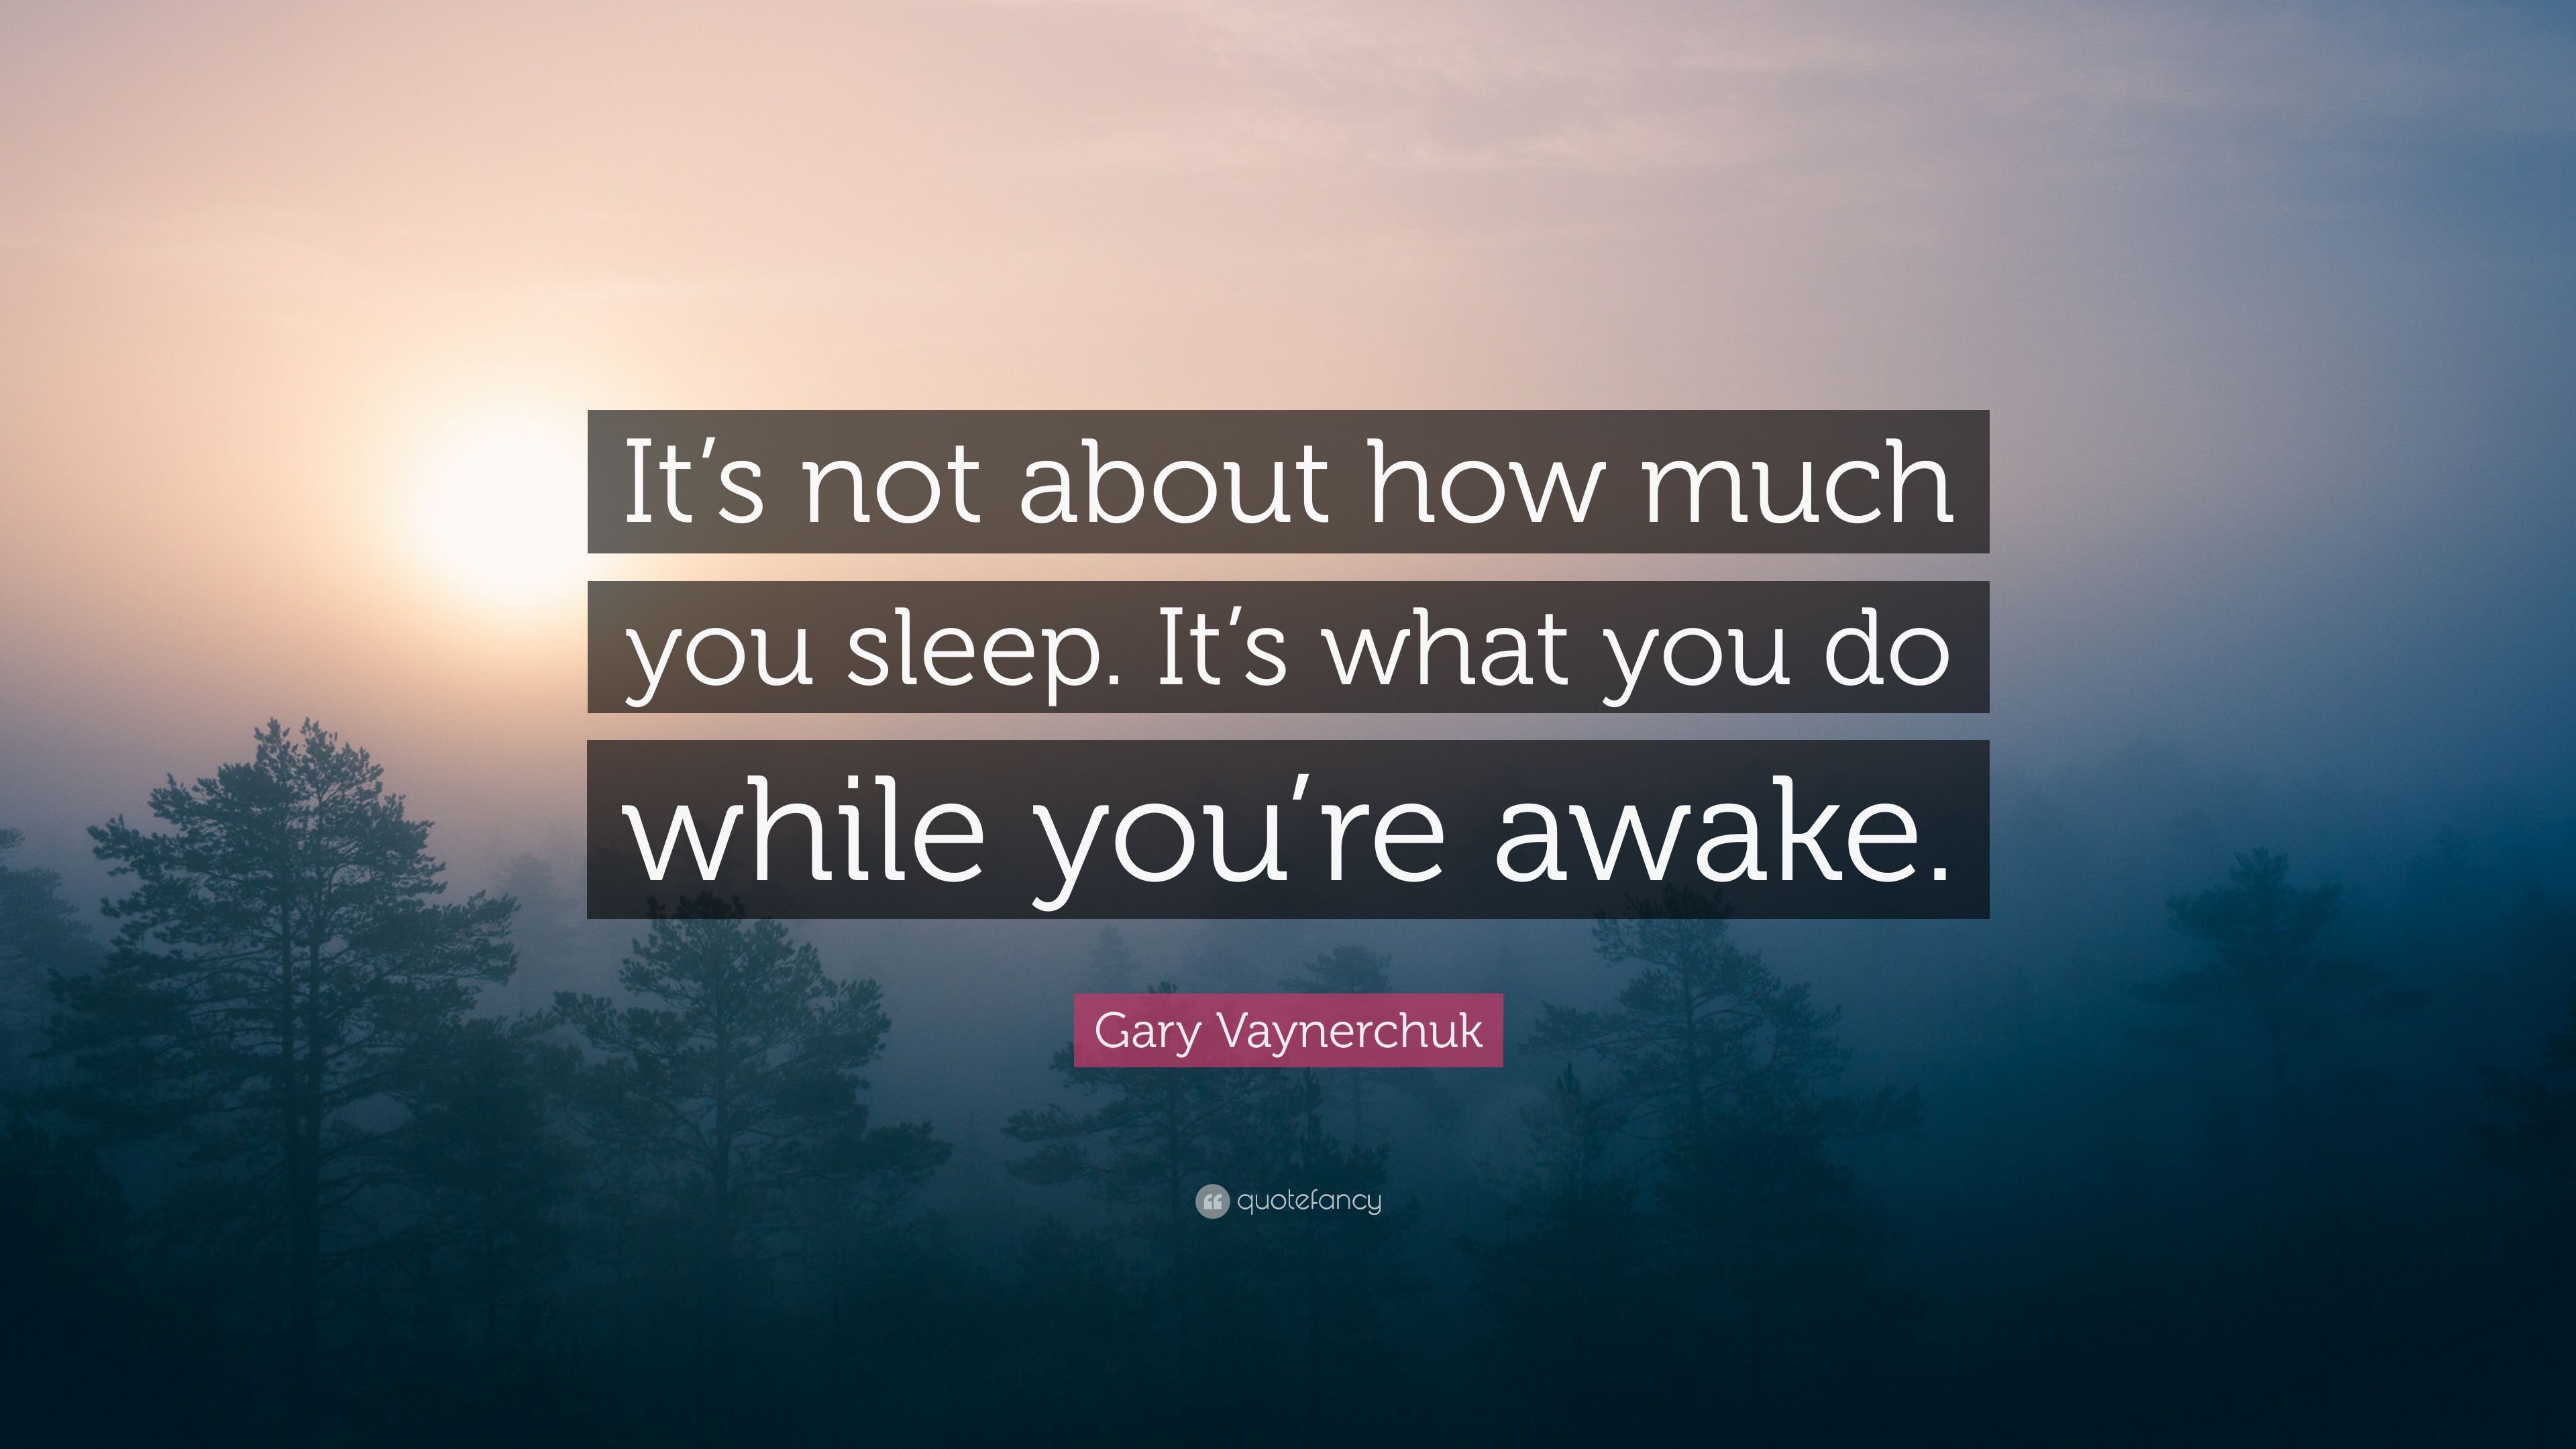 Gary Vaynerchuk Quote: "It's not about how much you sleep. 